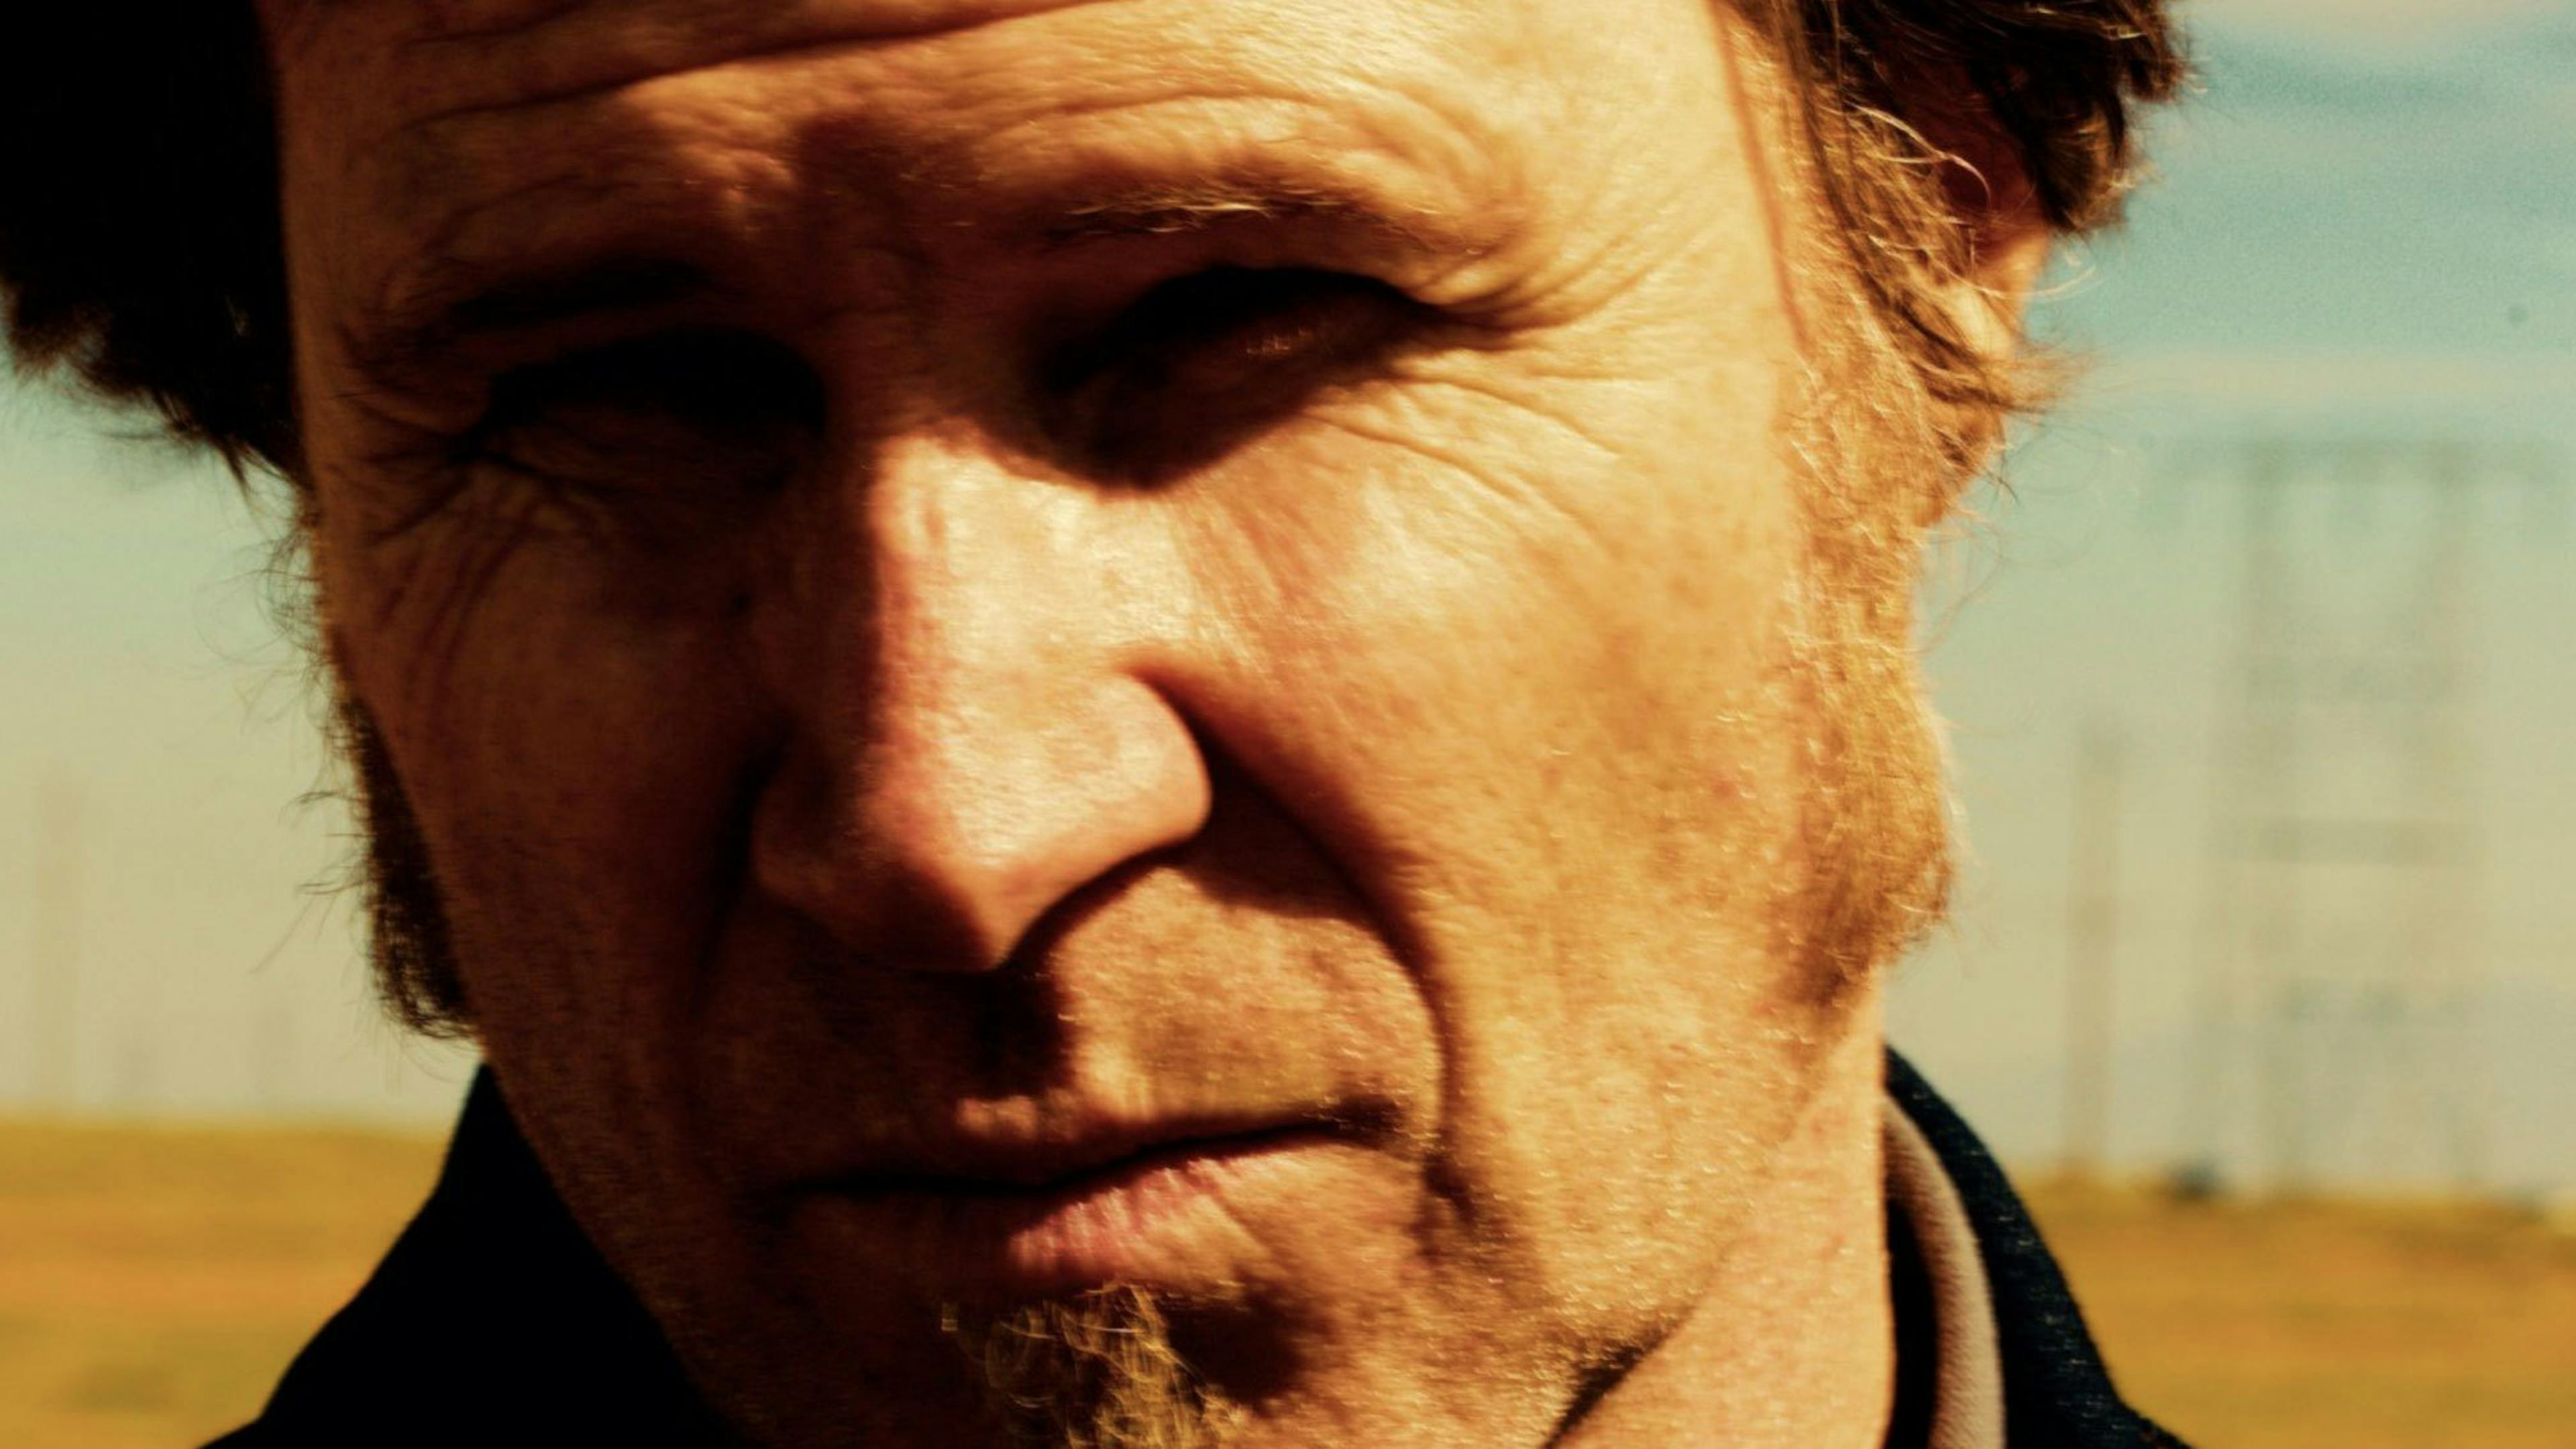 A tribute to Mark Lanegan, the most distinctive voice of his generation